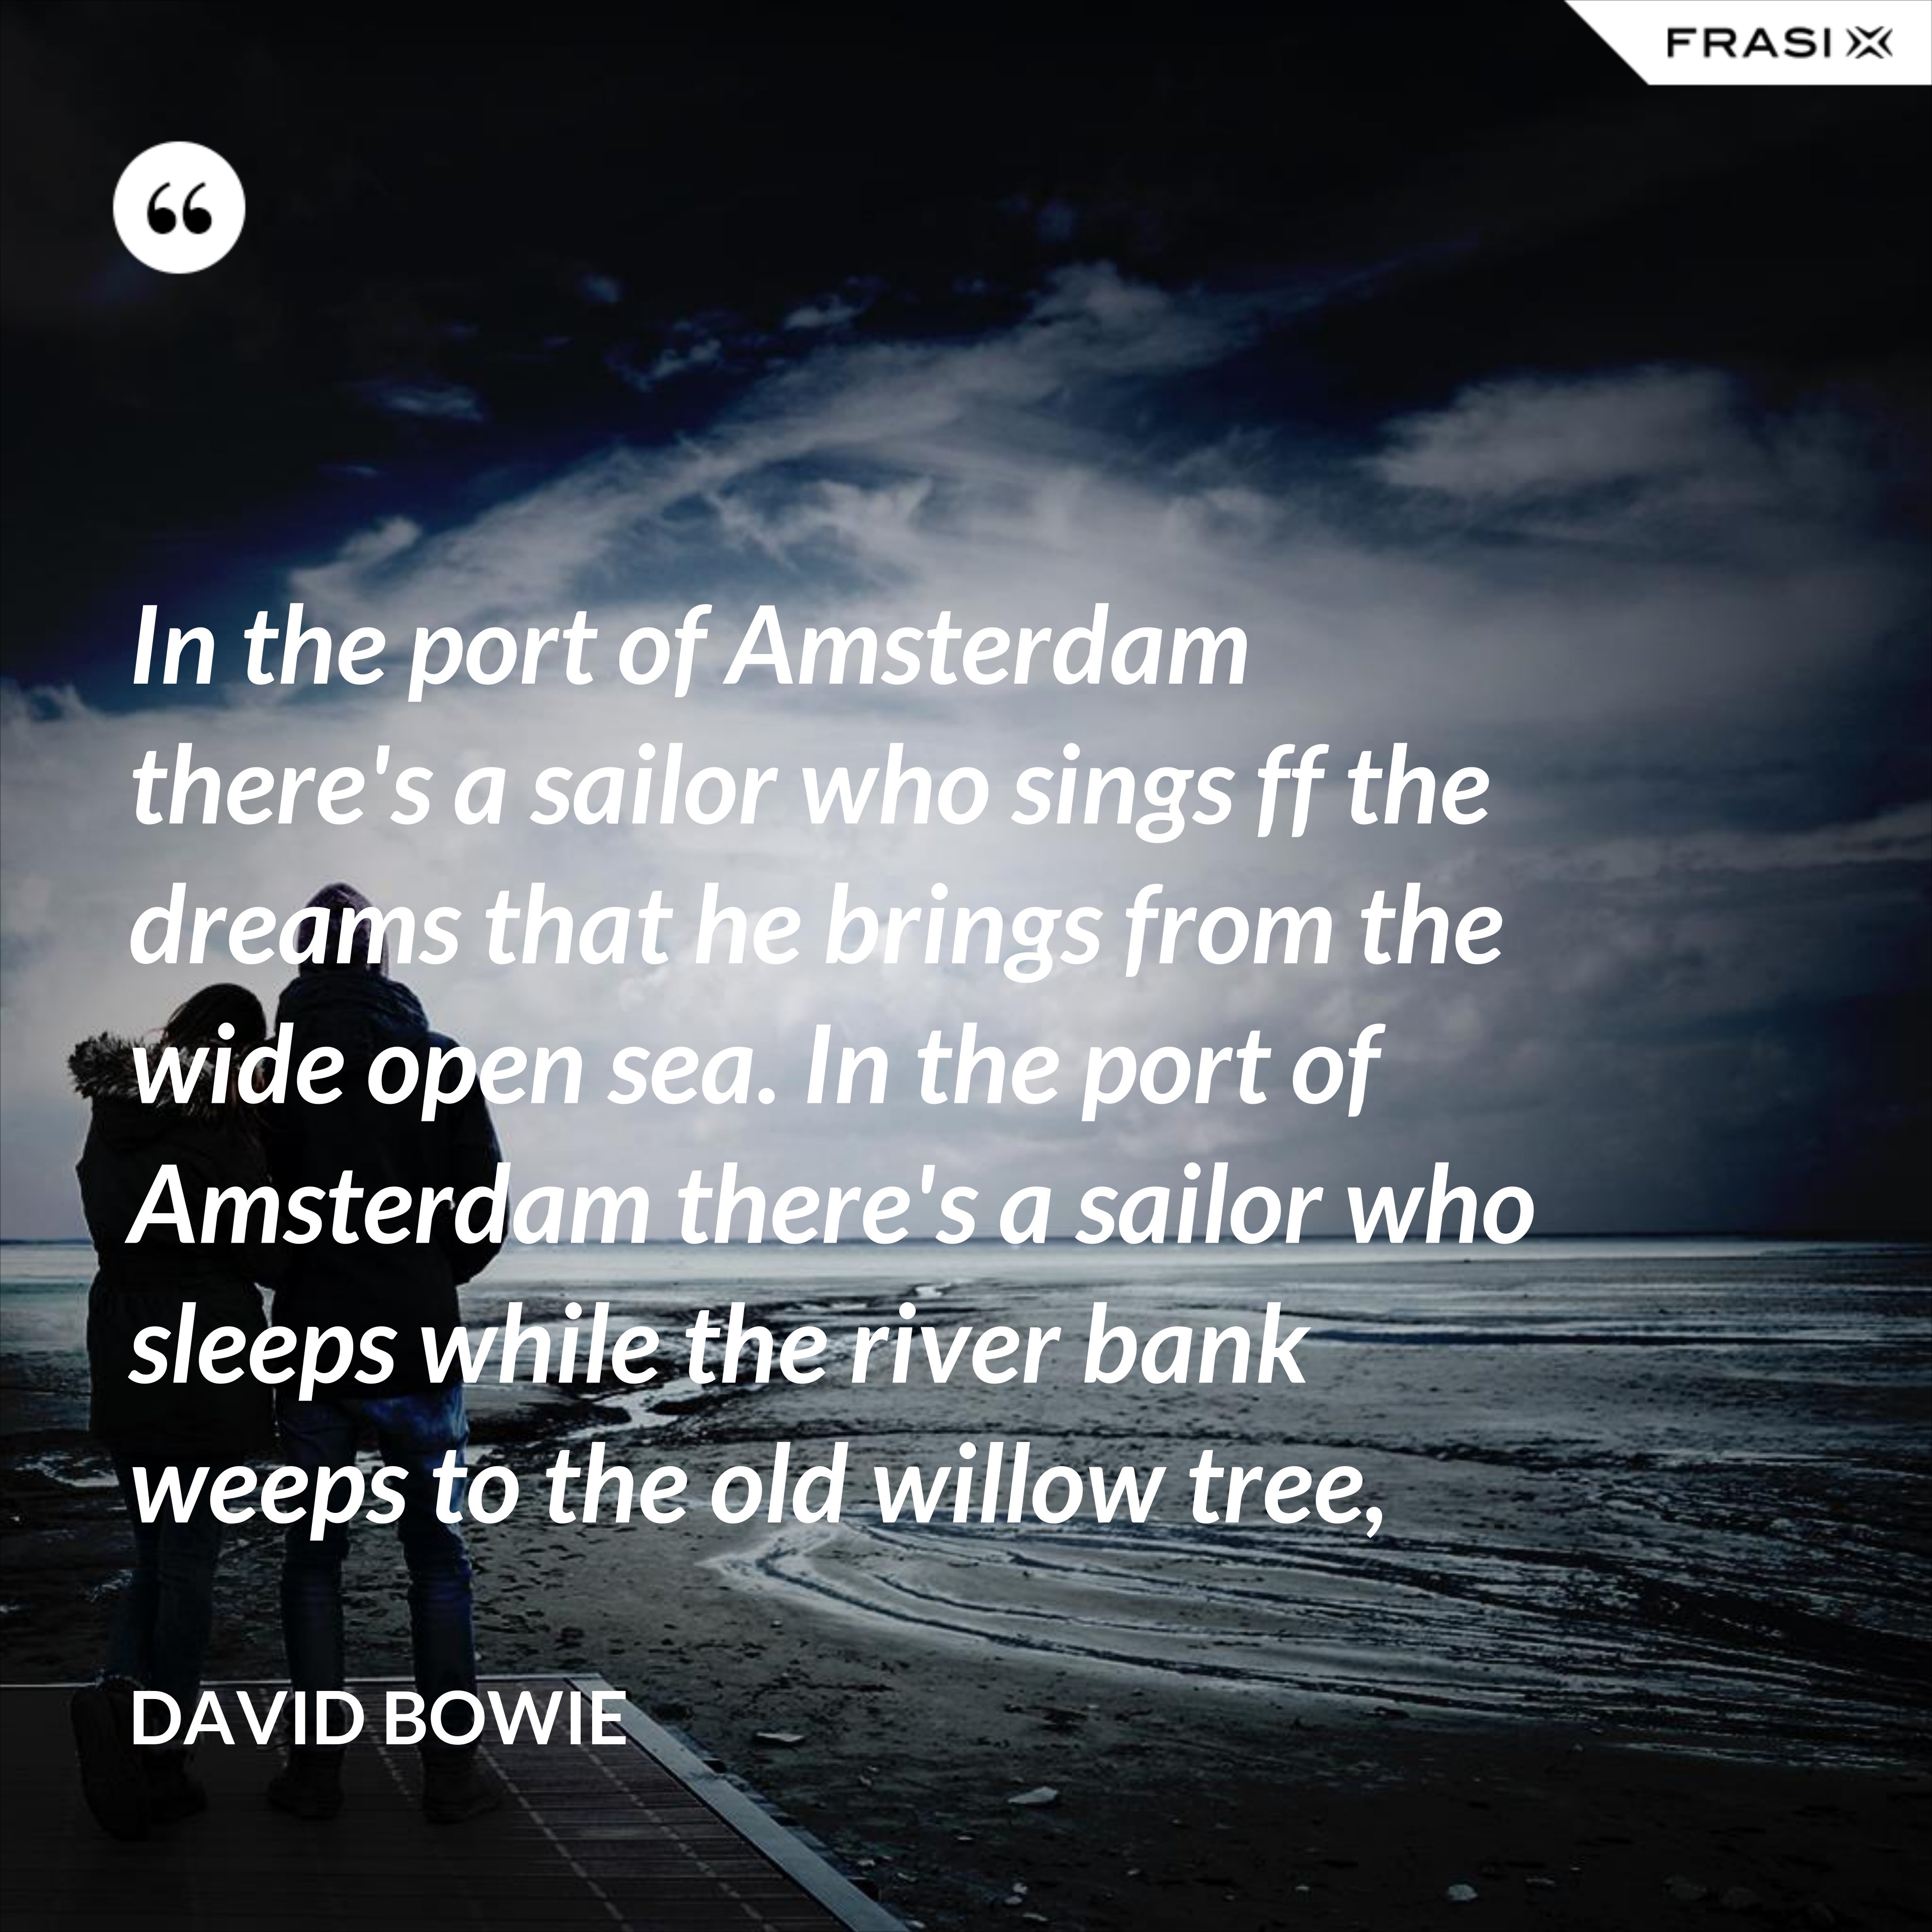 In the port of Amsterdam there's a sailor who sings ff the dreams that he brings from the wide open sea. In the port of Amsterdam there's a sailor who sleeps while the river bank weeps to the old willow tree, - David Bowie